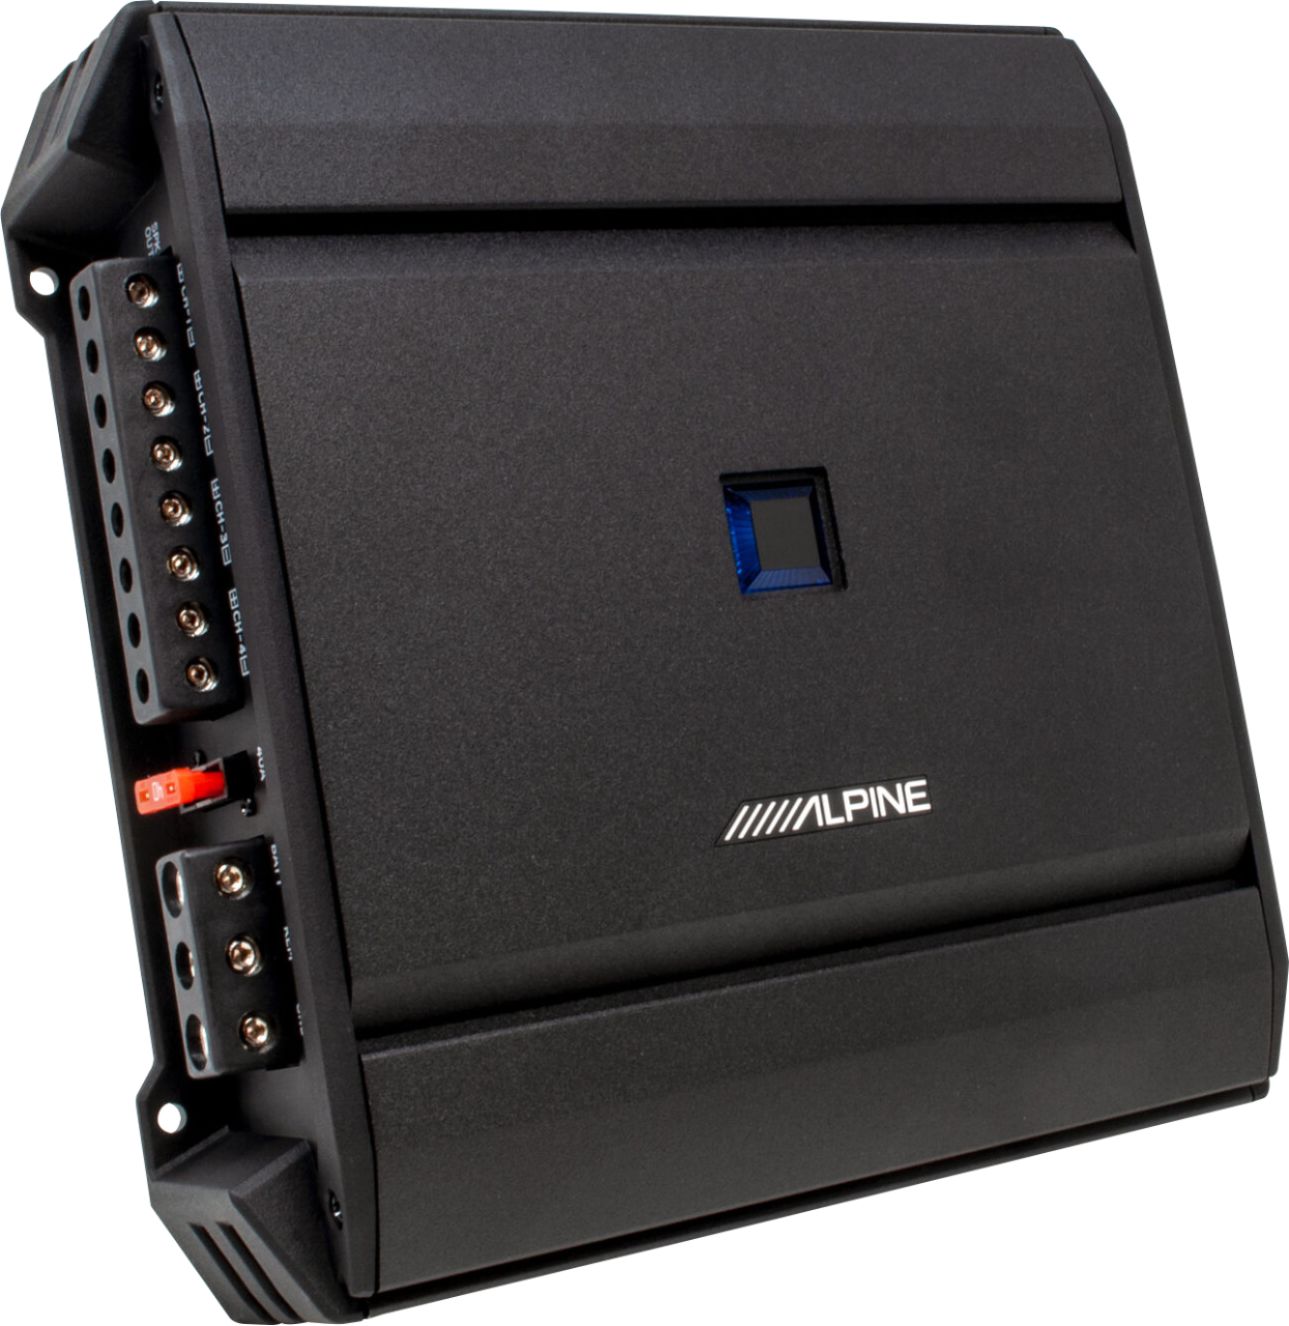 Angle View: KICKER - DXA Class D Bridgeable Multichannel Amplifier with Variable Crossovers - Black